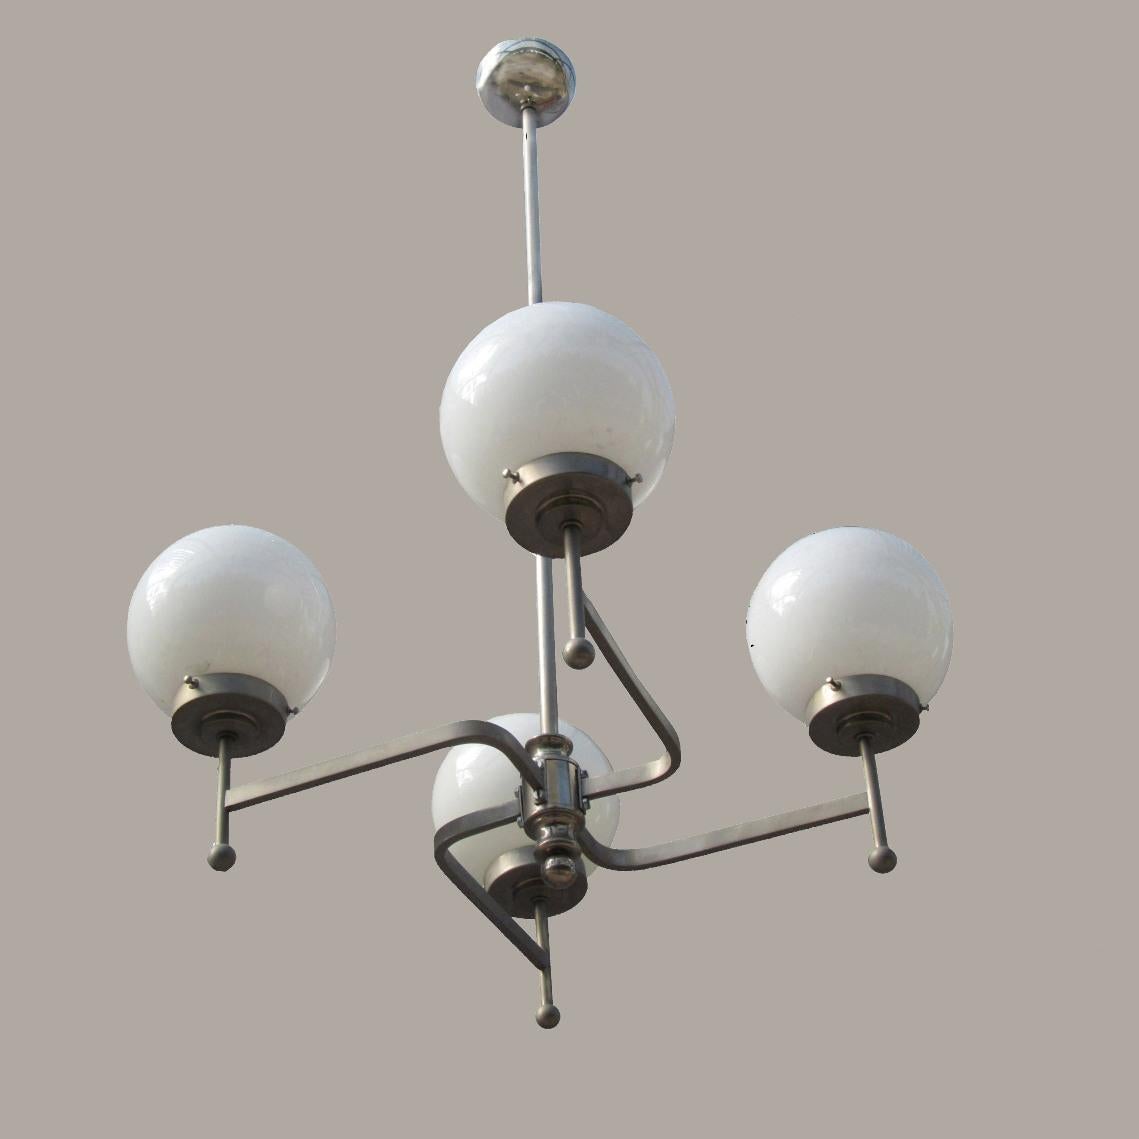 Plated Early Bauhaus Four Opaline Sphere Lights Manji Shaped Chandelier, Germany, 1920s For Sale